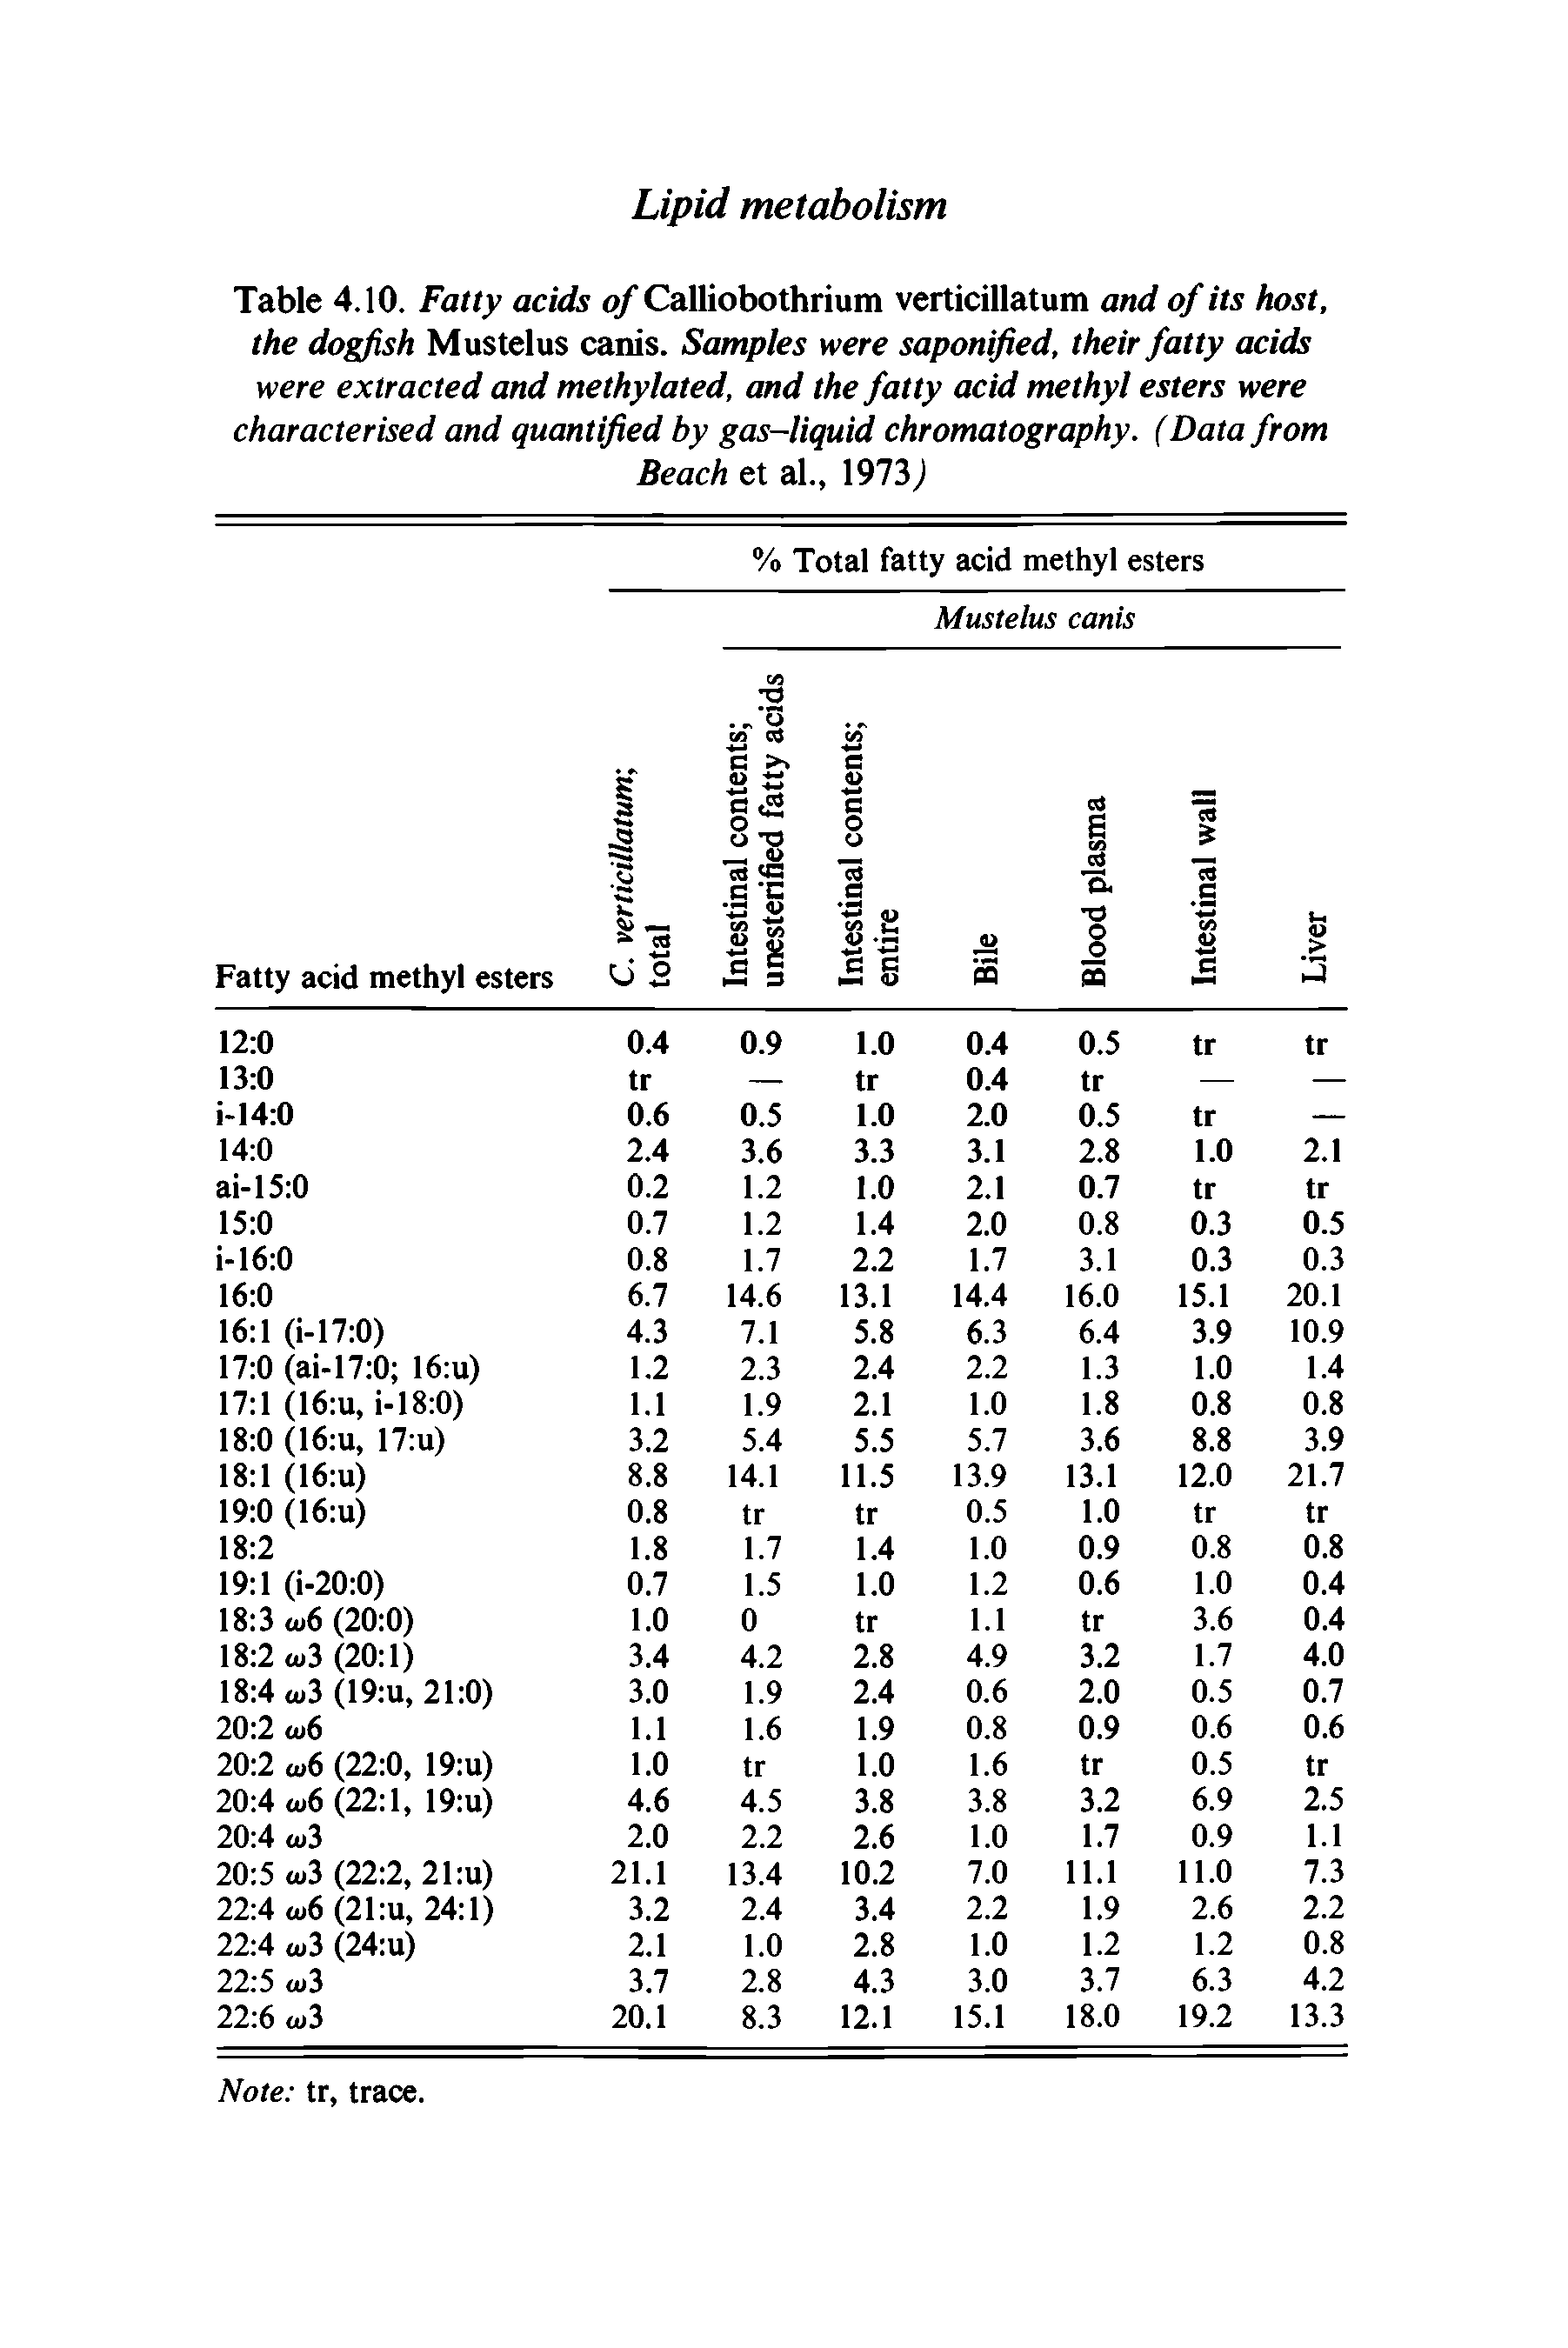 Table 4.10. Fatty acids of Calliobothrium verticillatum and of its host, the dogfish Mustelus canis. Samples were saponified, their fatty acids were extracted and methylated, and the fatty acid methyl esters were characterised and quantified by gas-liquid chromatography. (Data from...